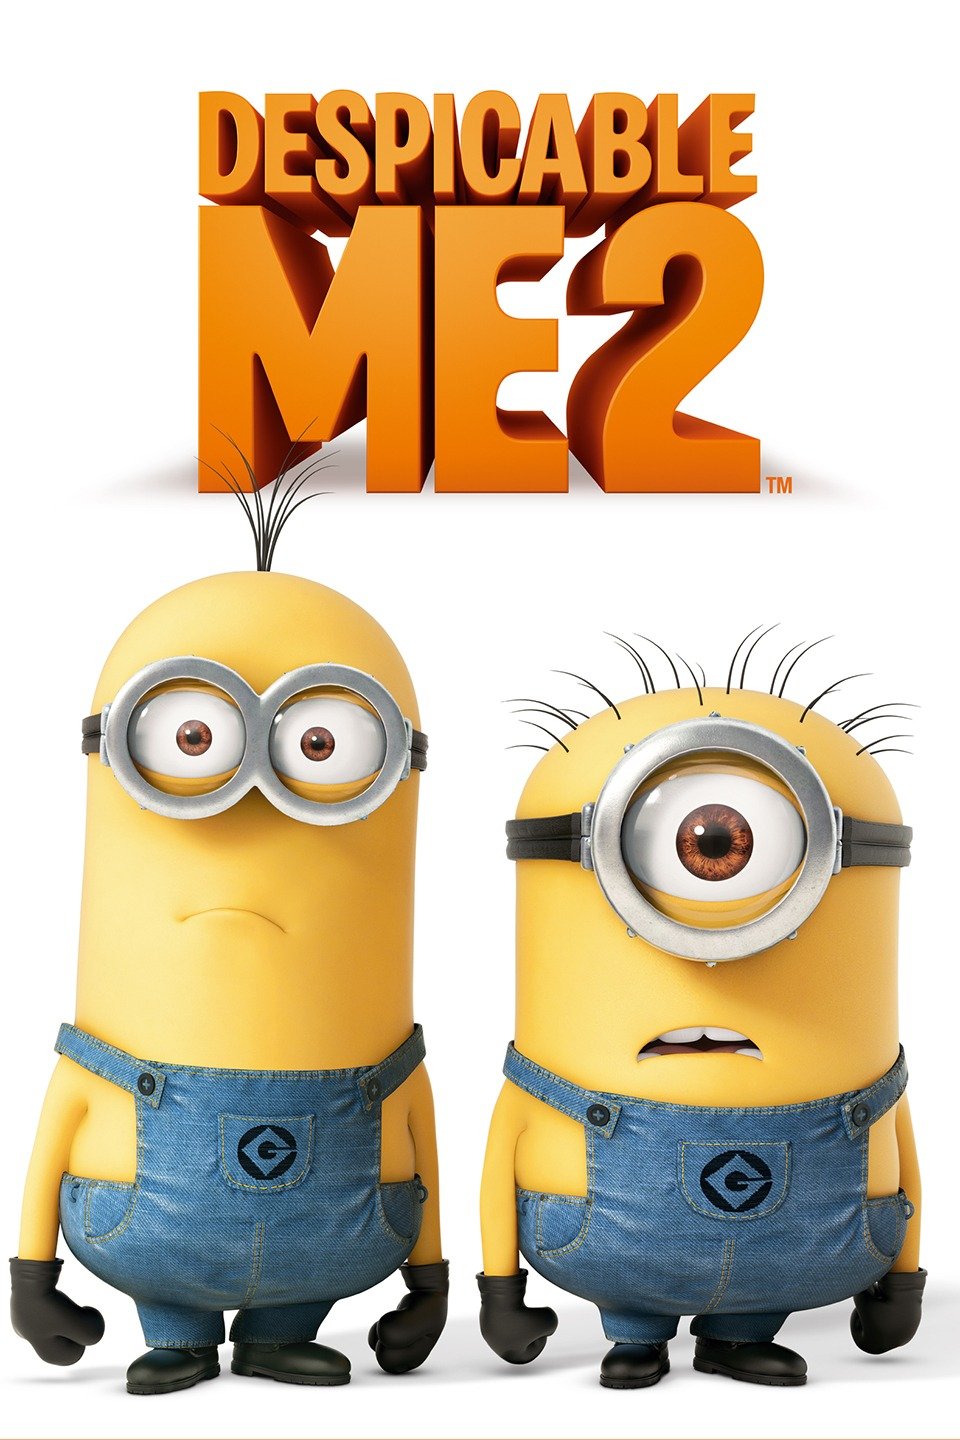 despicable me 1 movie cover